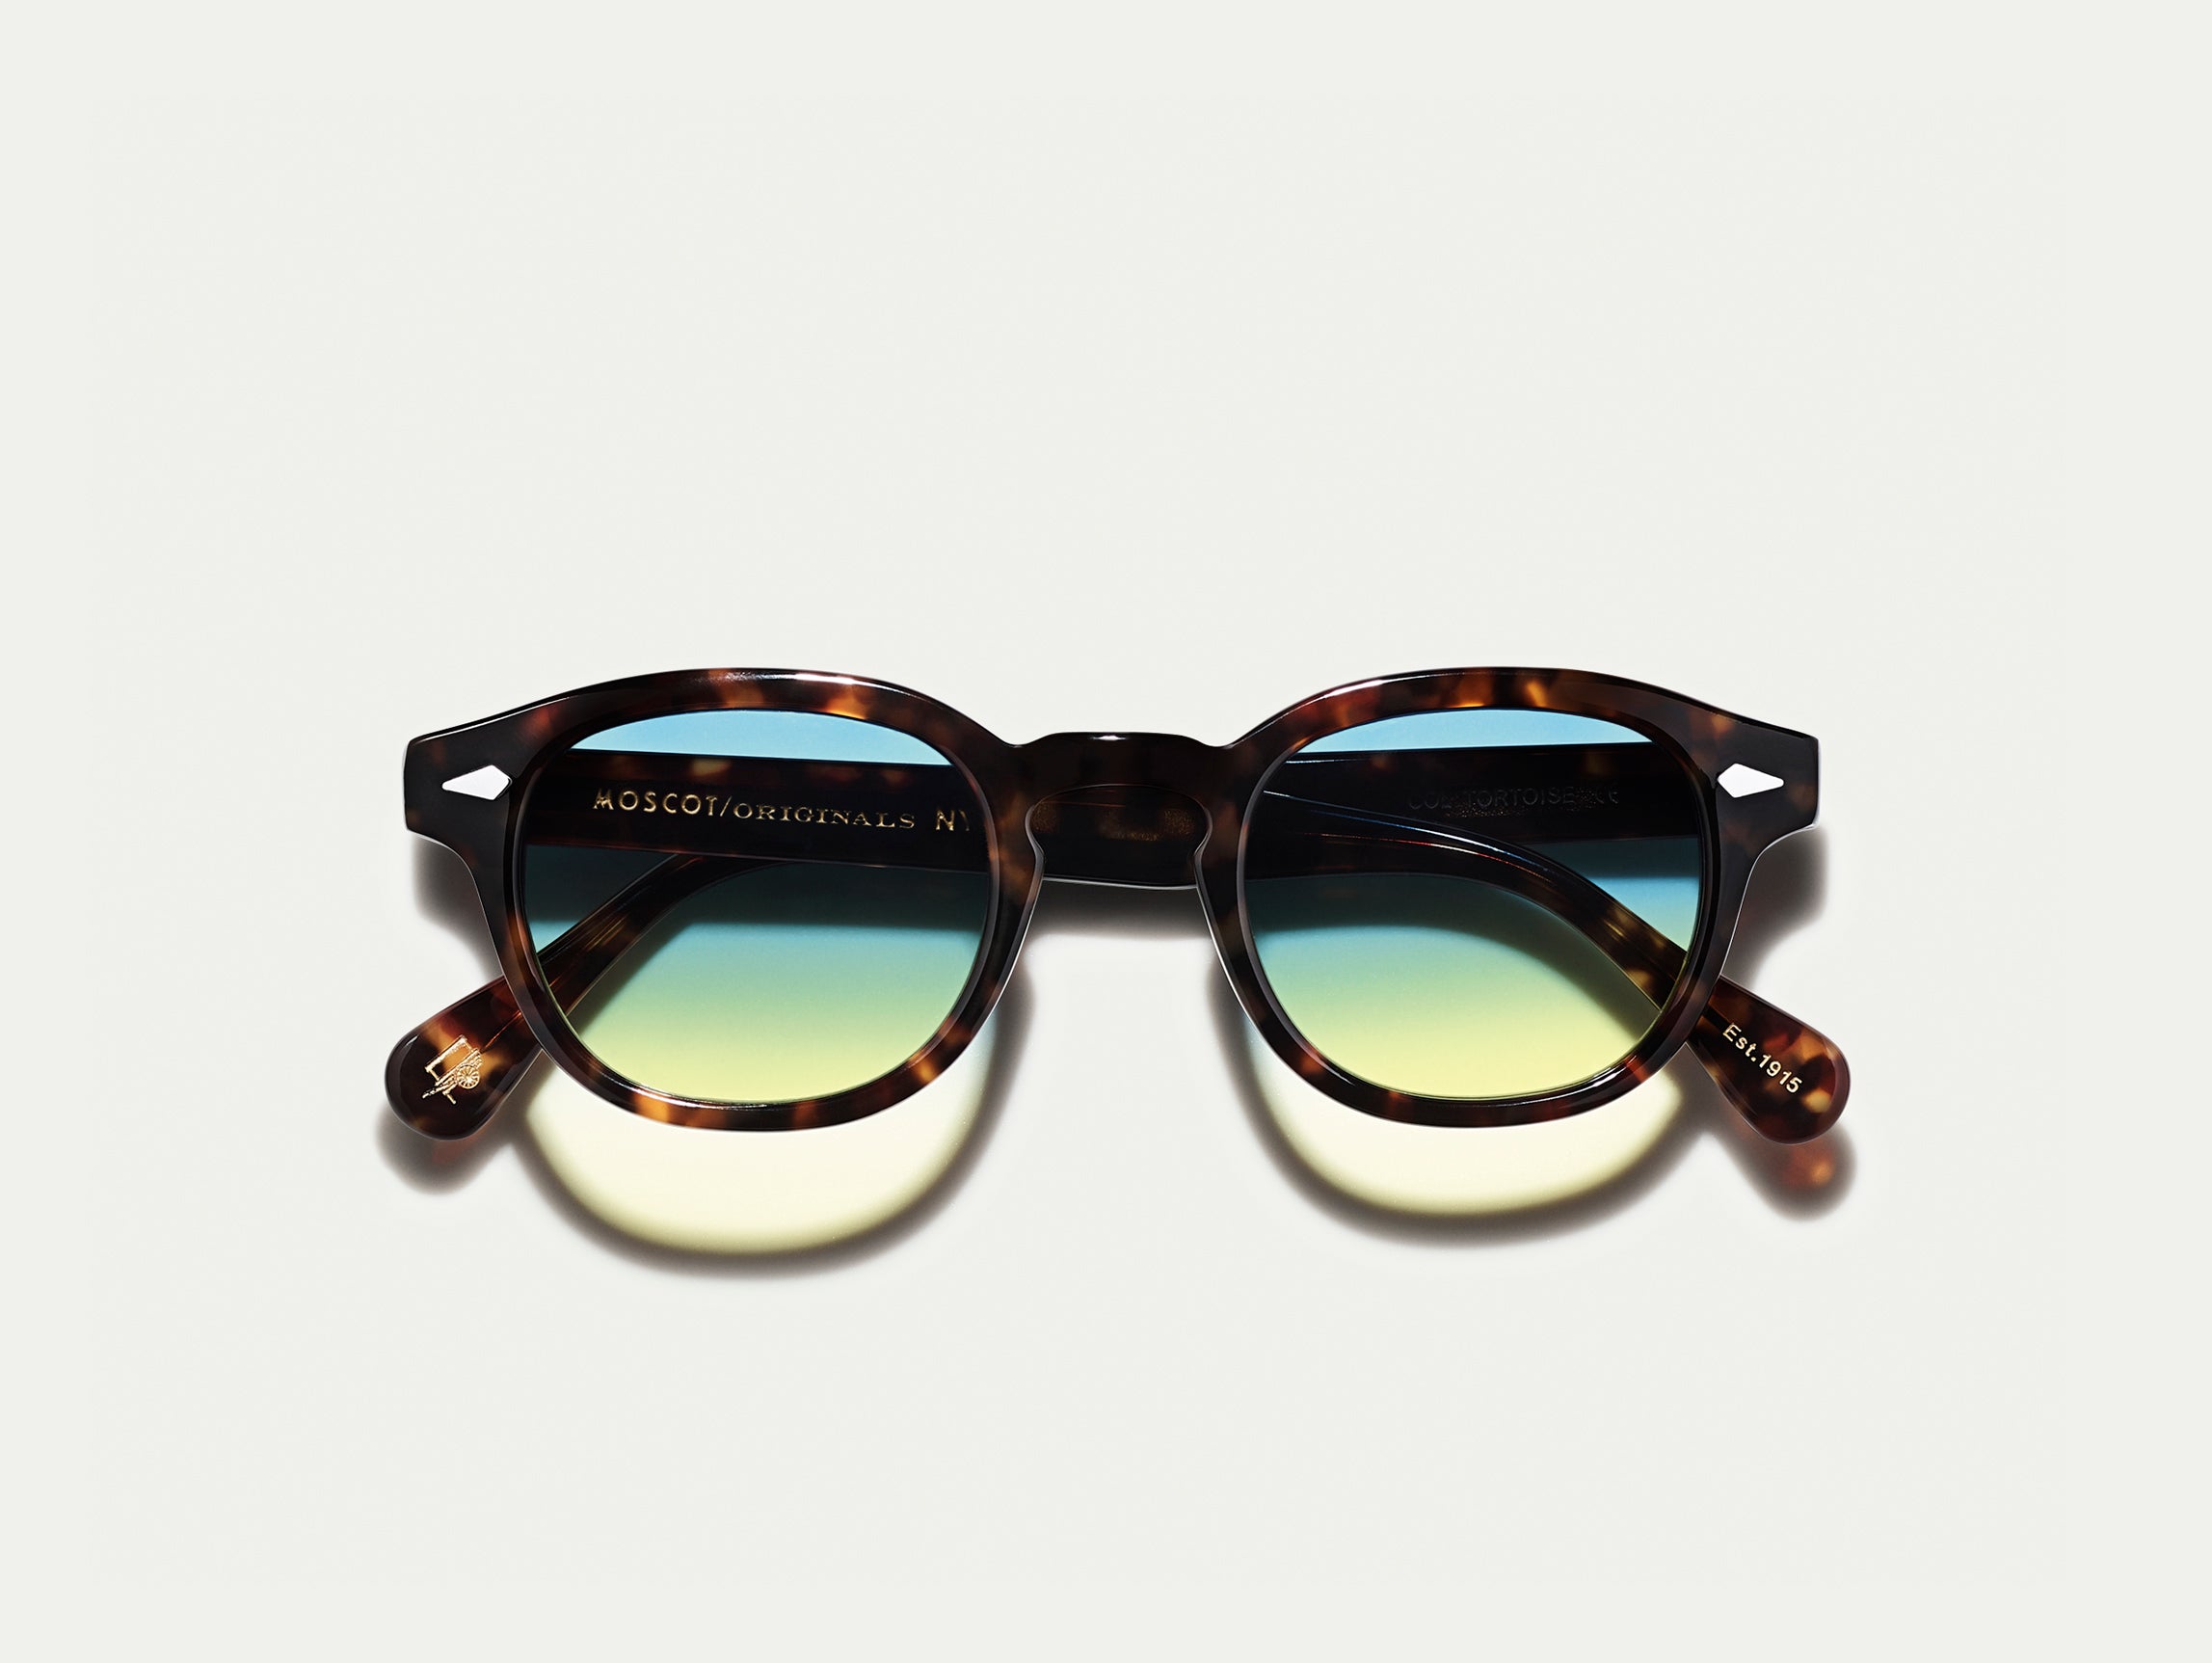 LEMTOSH in Tortoise | Tinted Glasses – MOSCOT NYC SINCE 1915